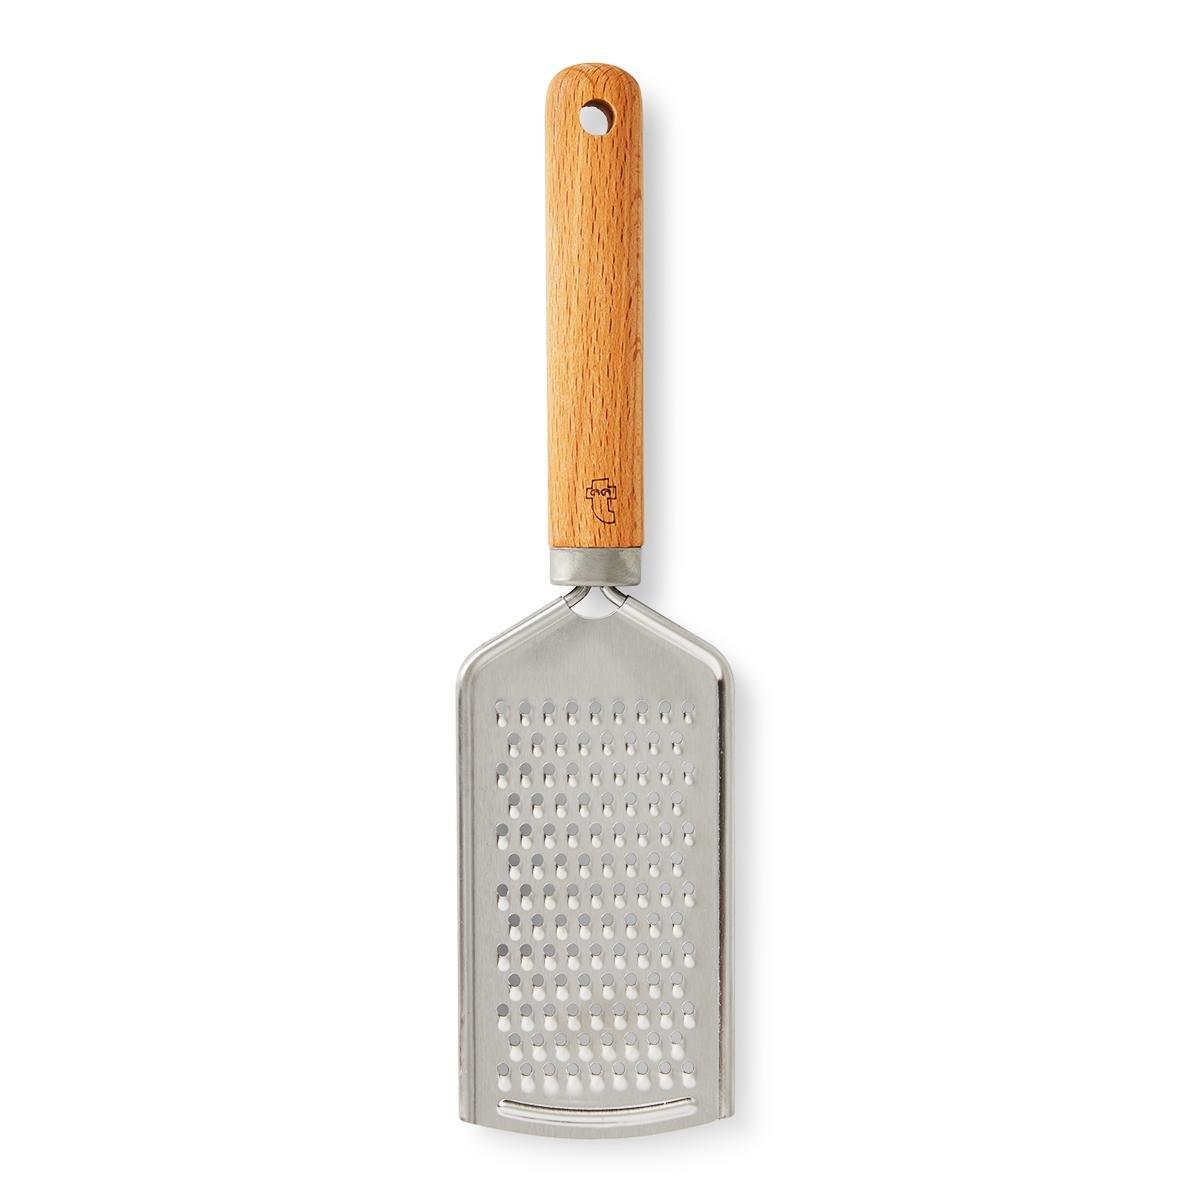 Stainless steel fine grater.